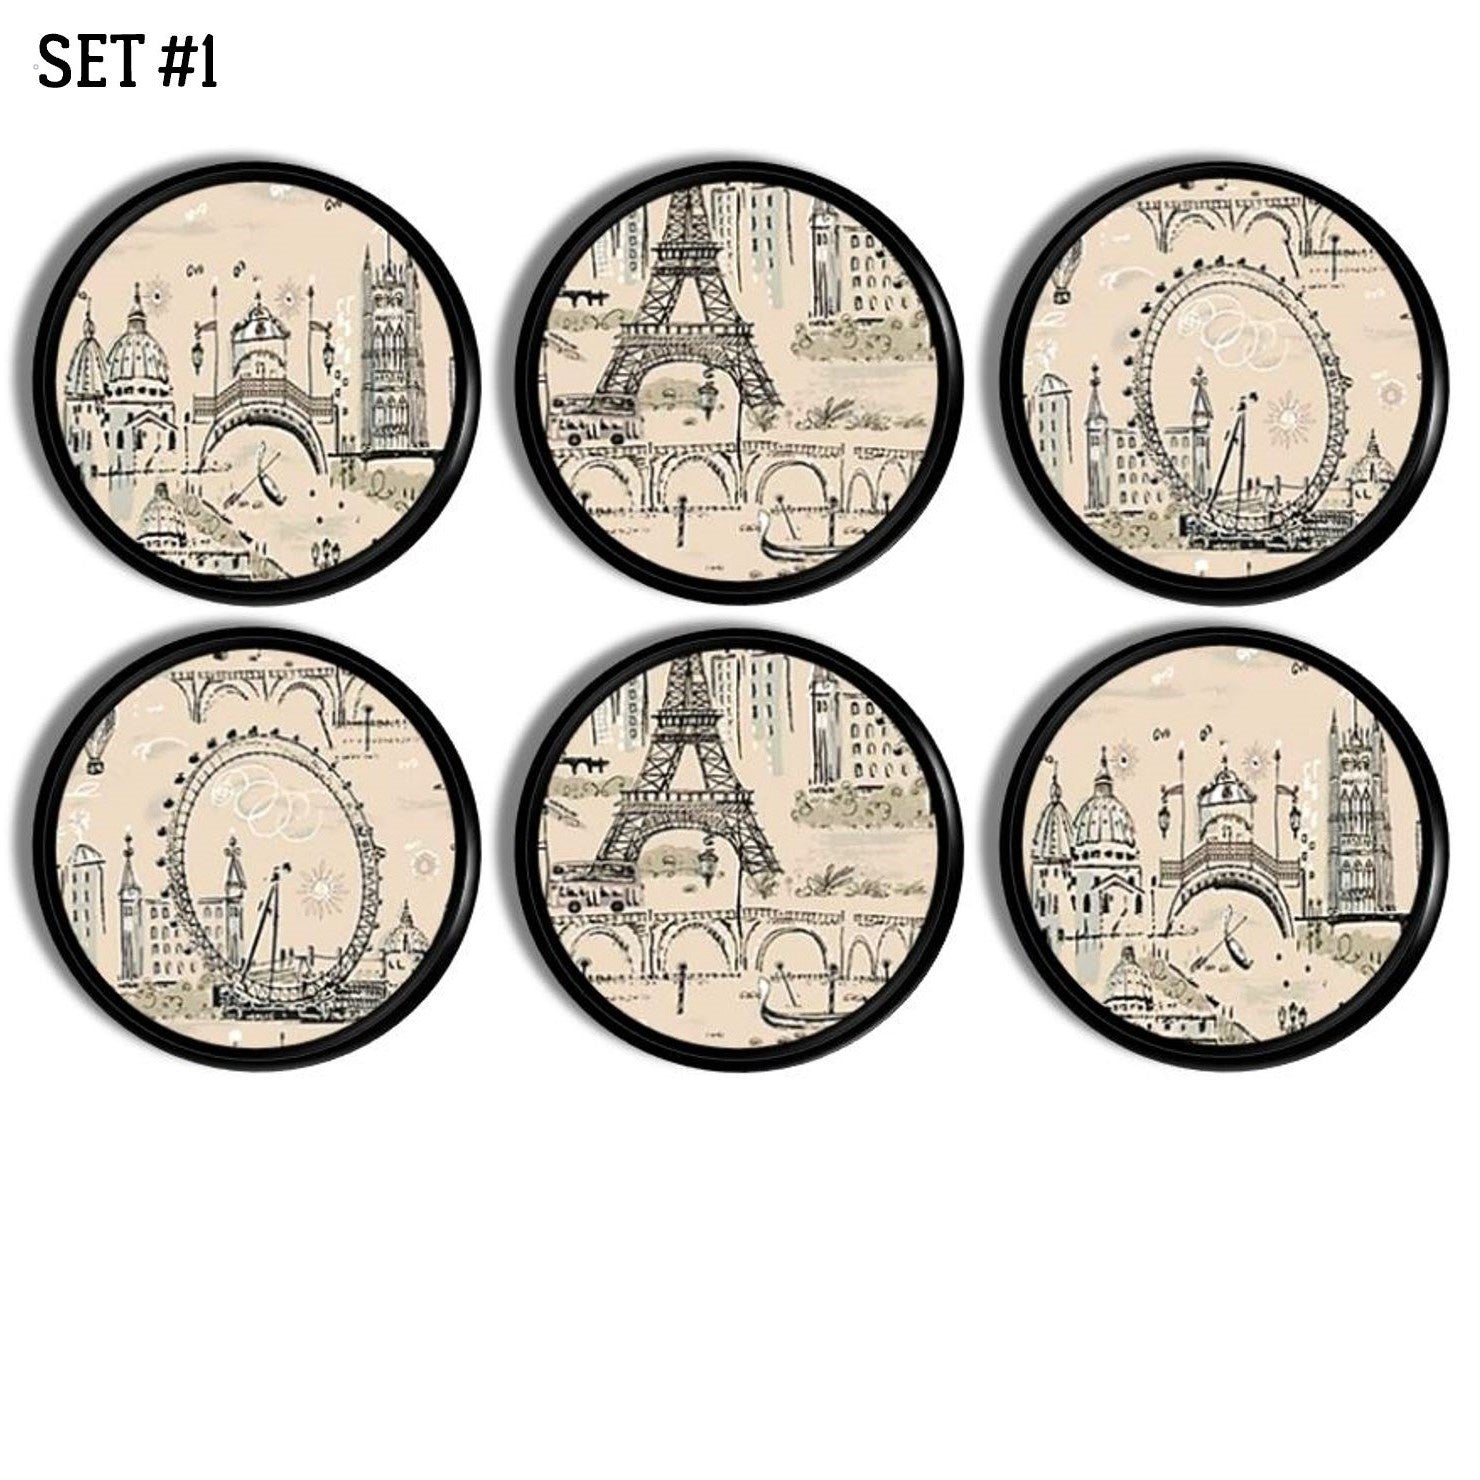 6 Holiday in Paris Handmade furniture knobs. Decorative drawer pulls in a pen &amp; ink toile artwork of French landmarks; Eiffel Tower, Notre Dame Cathedral.